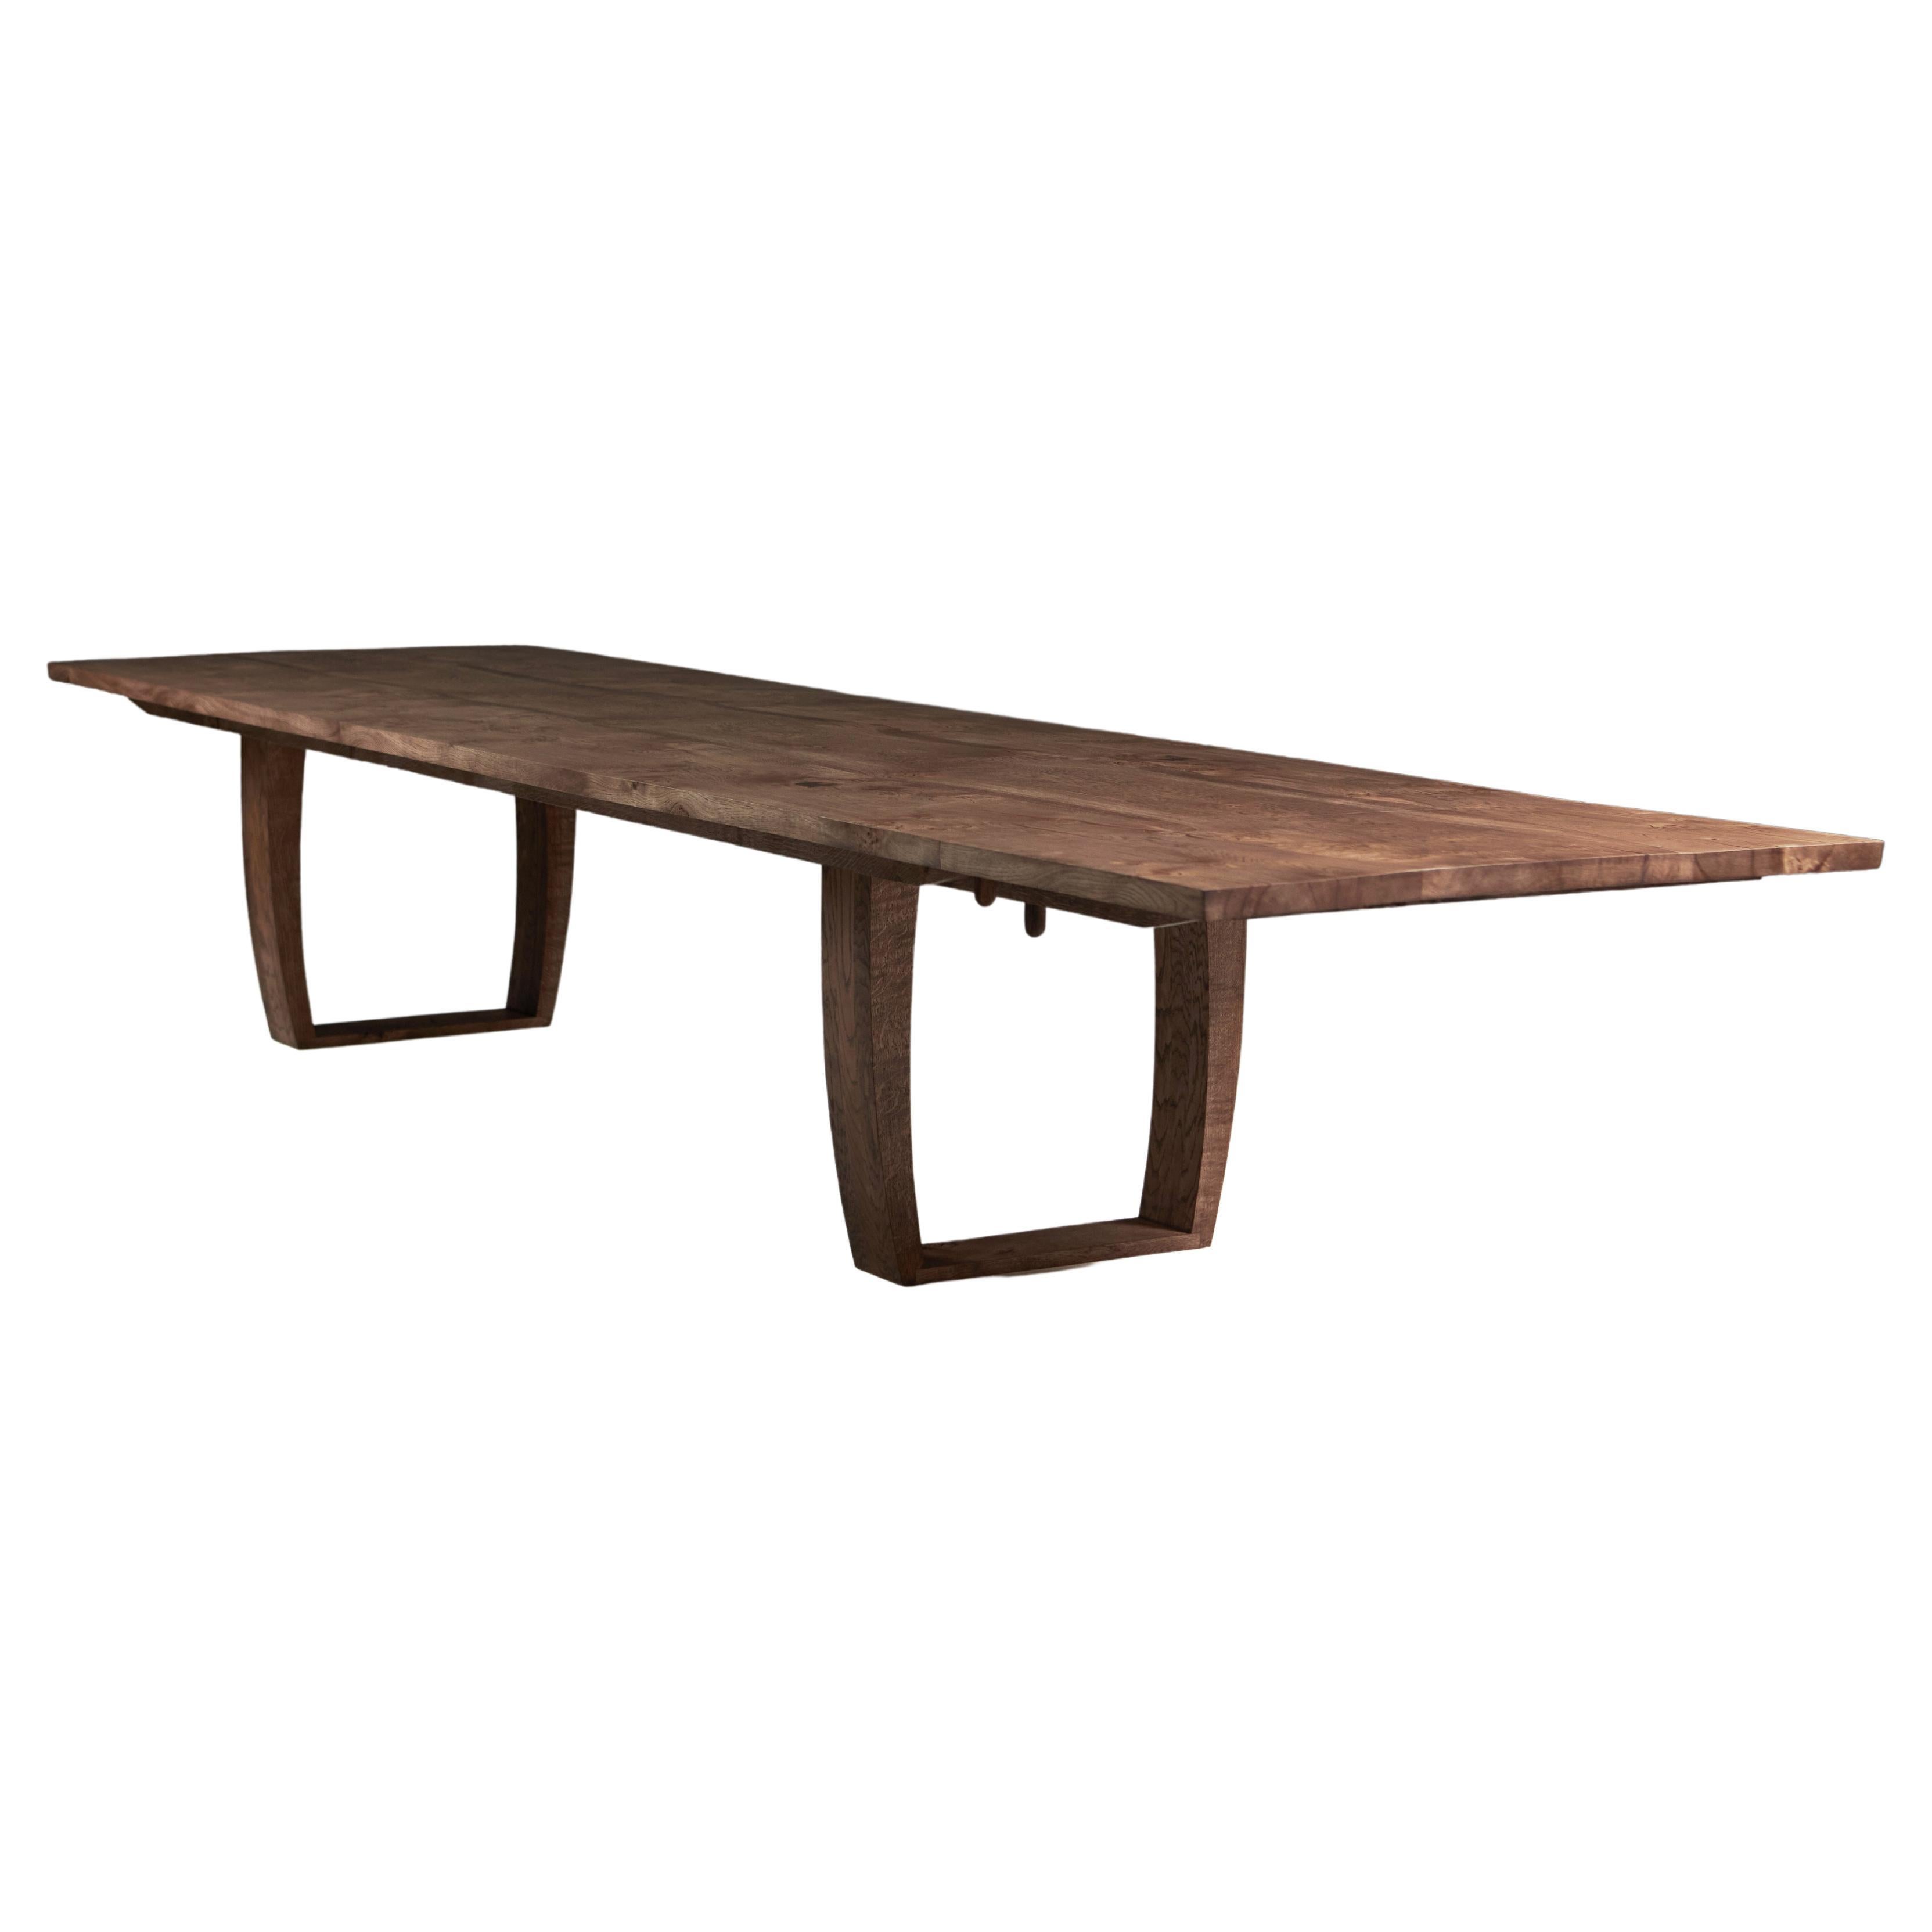 Book-Matched Extendable Table in solid English Oak